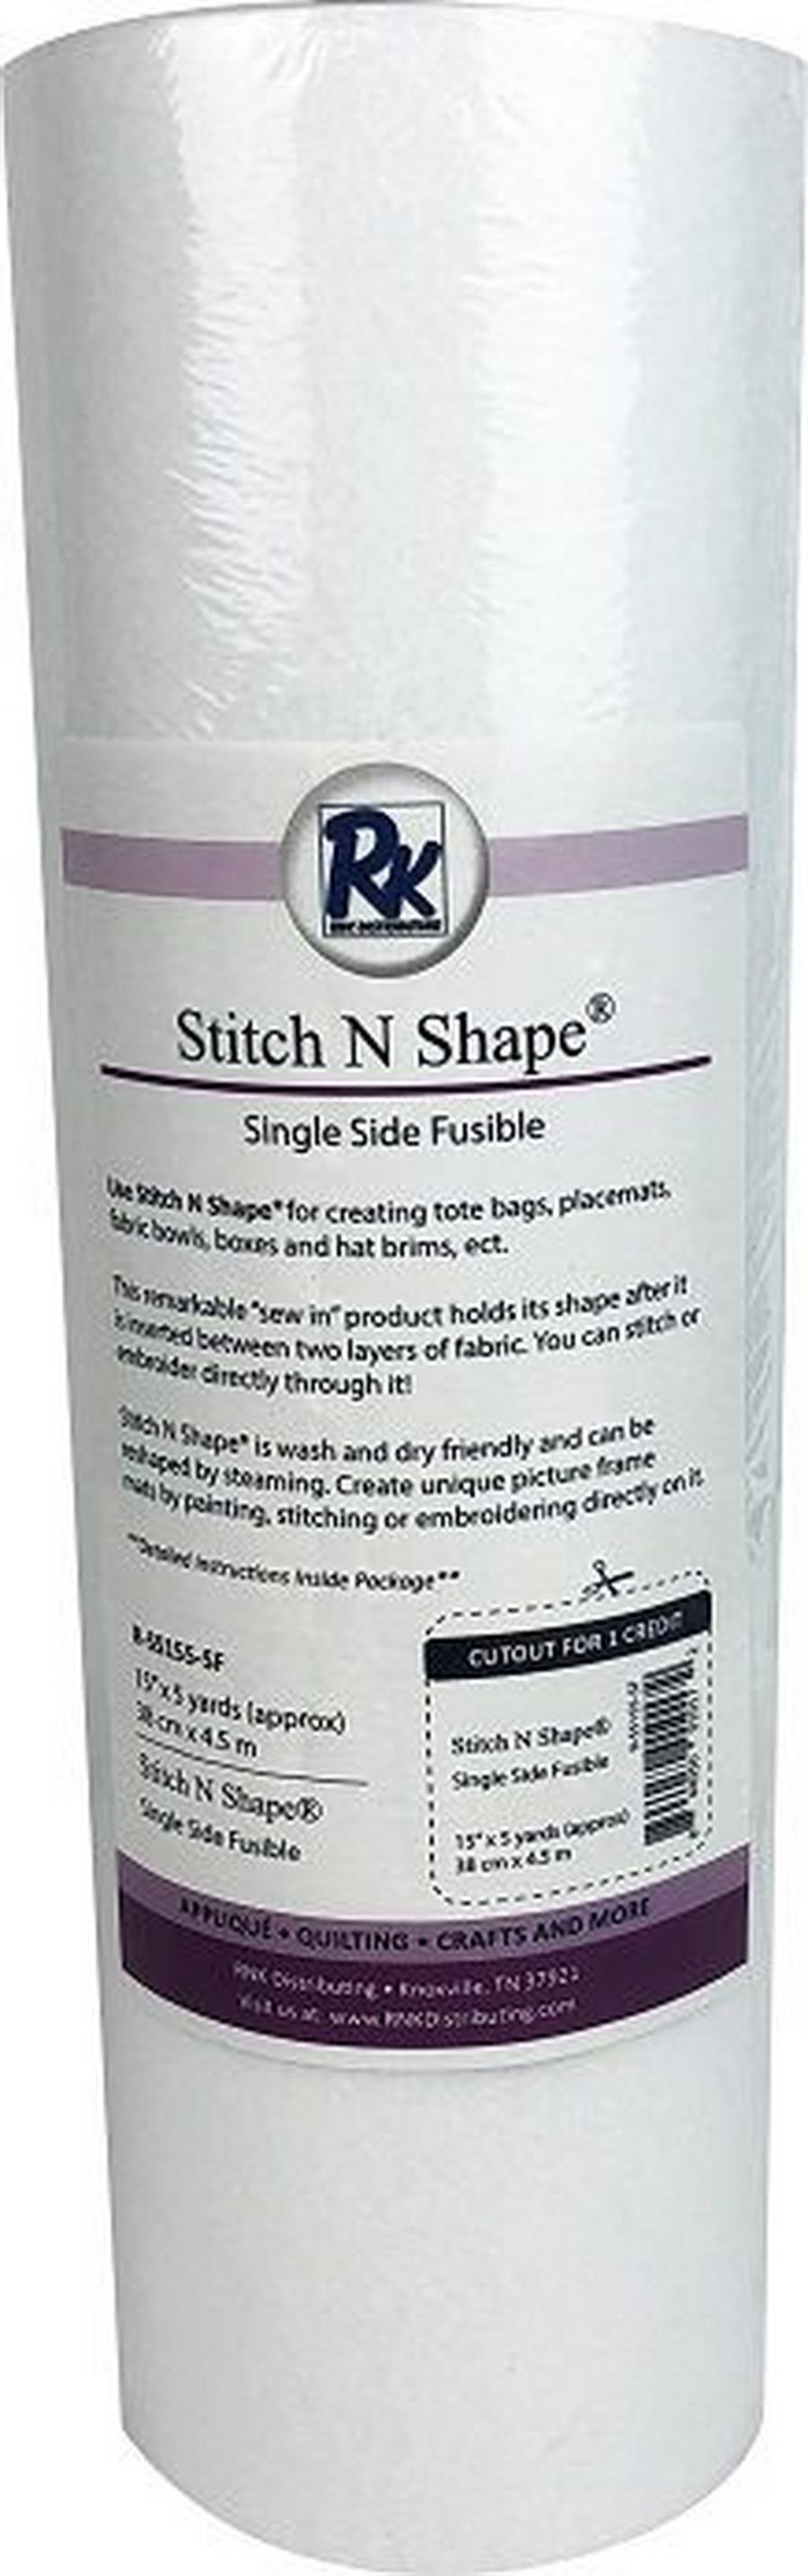 RNK Stitch N Shape Single Side Fusible - 15" x 5yds